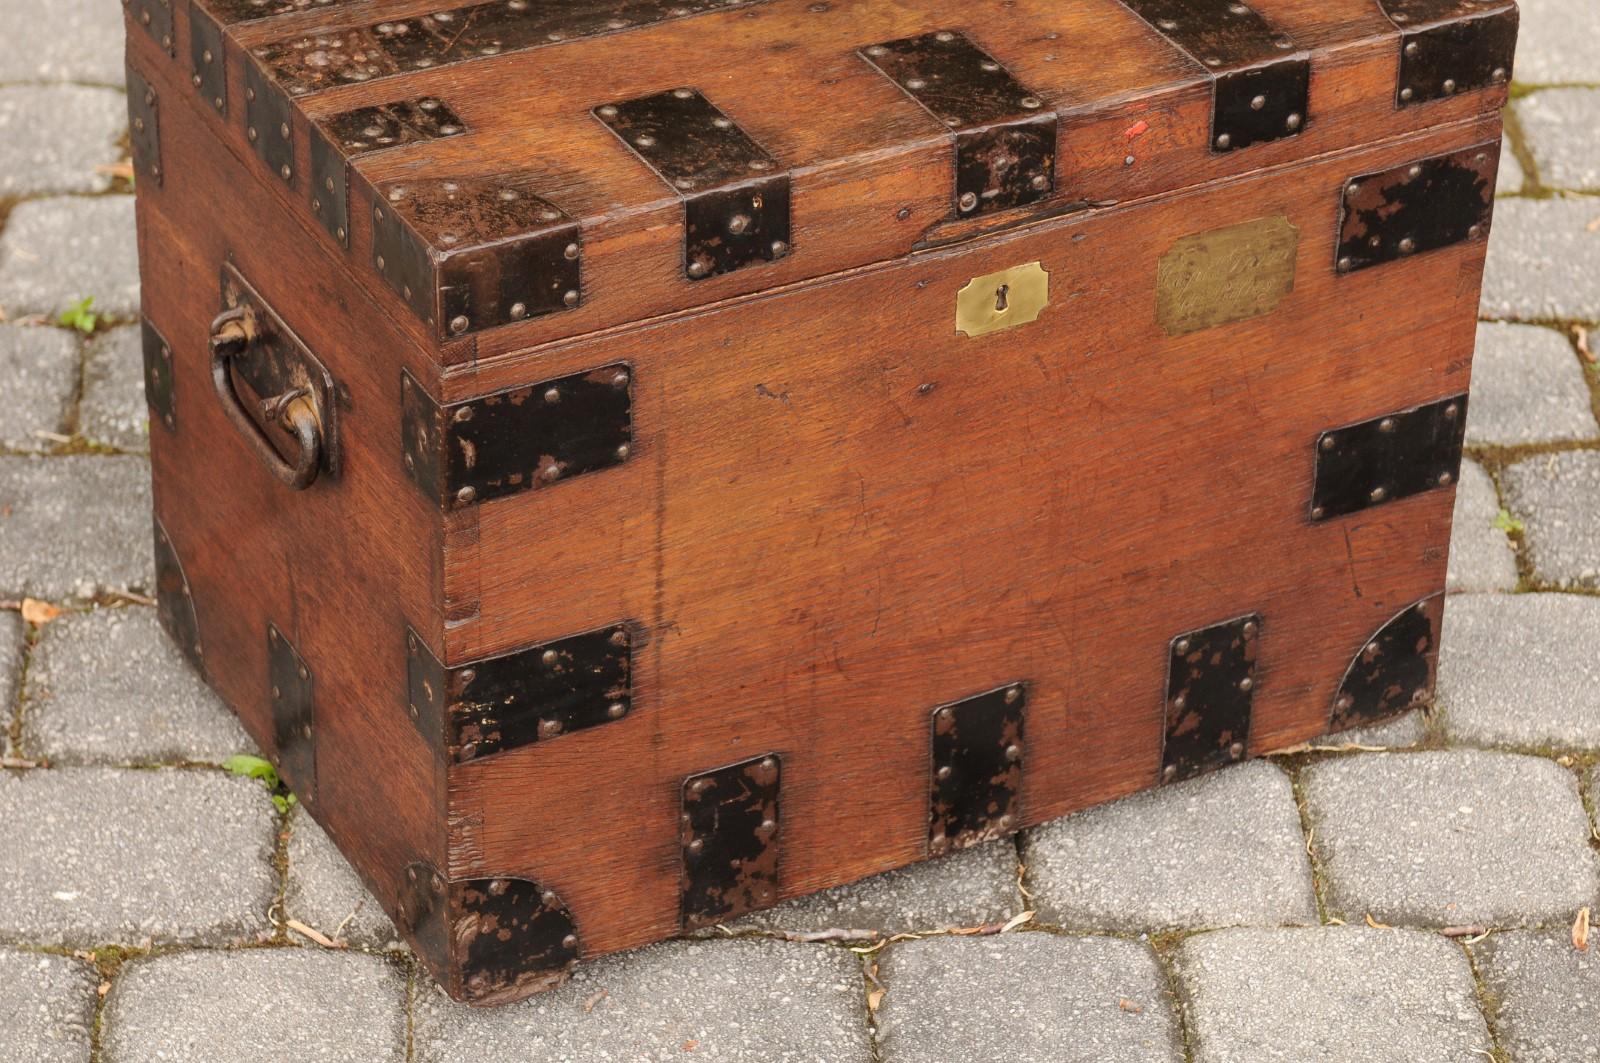 English Oak Trunk with Metal Accents and Lateral Handles, Late 19th Century For Sale 2